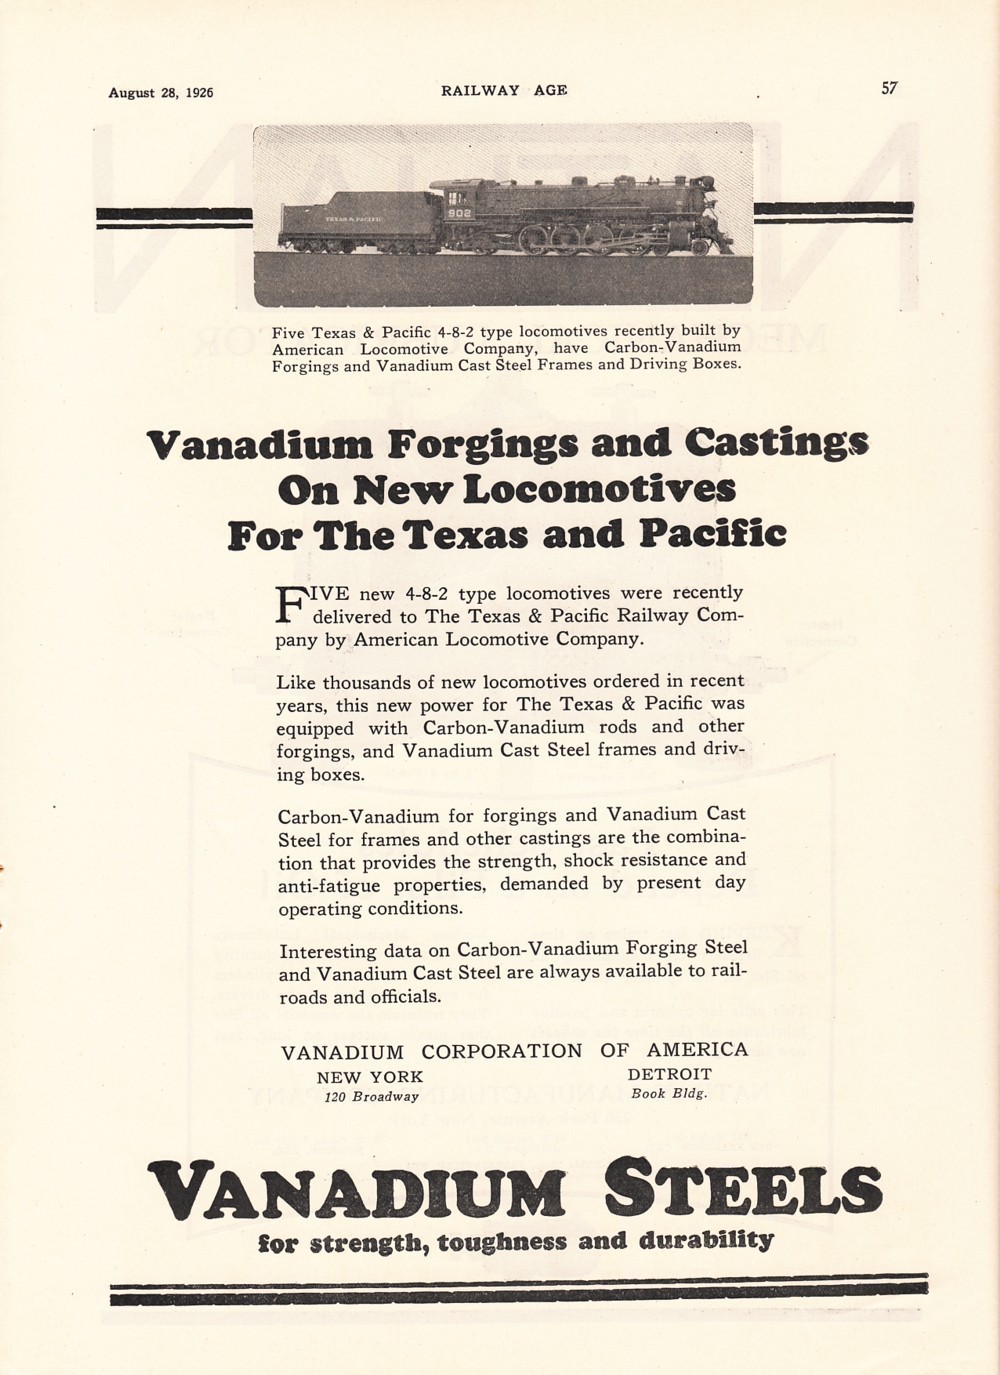 Image of T&P  Advertisements - Vanadium forgings and castings on new locomotives for the Texas and Pacific